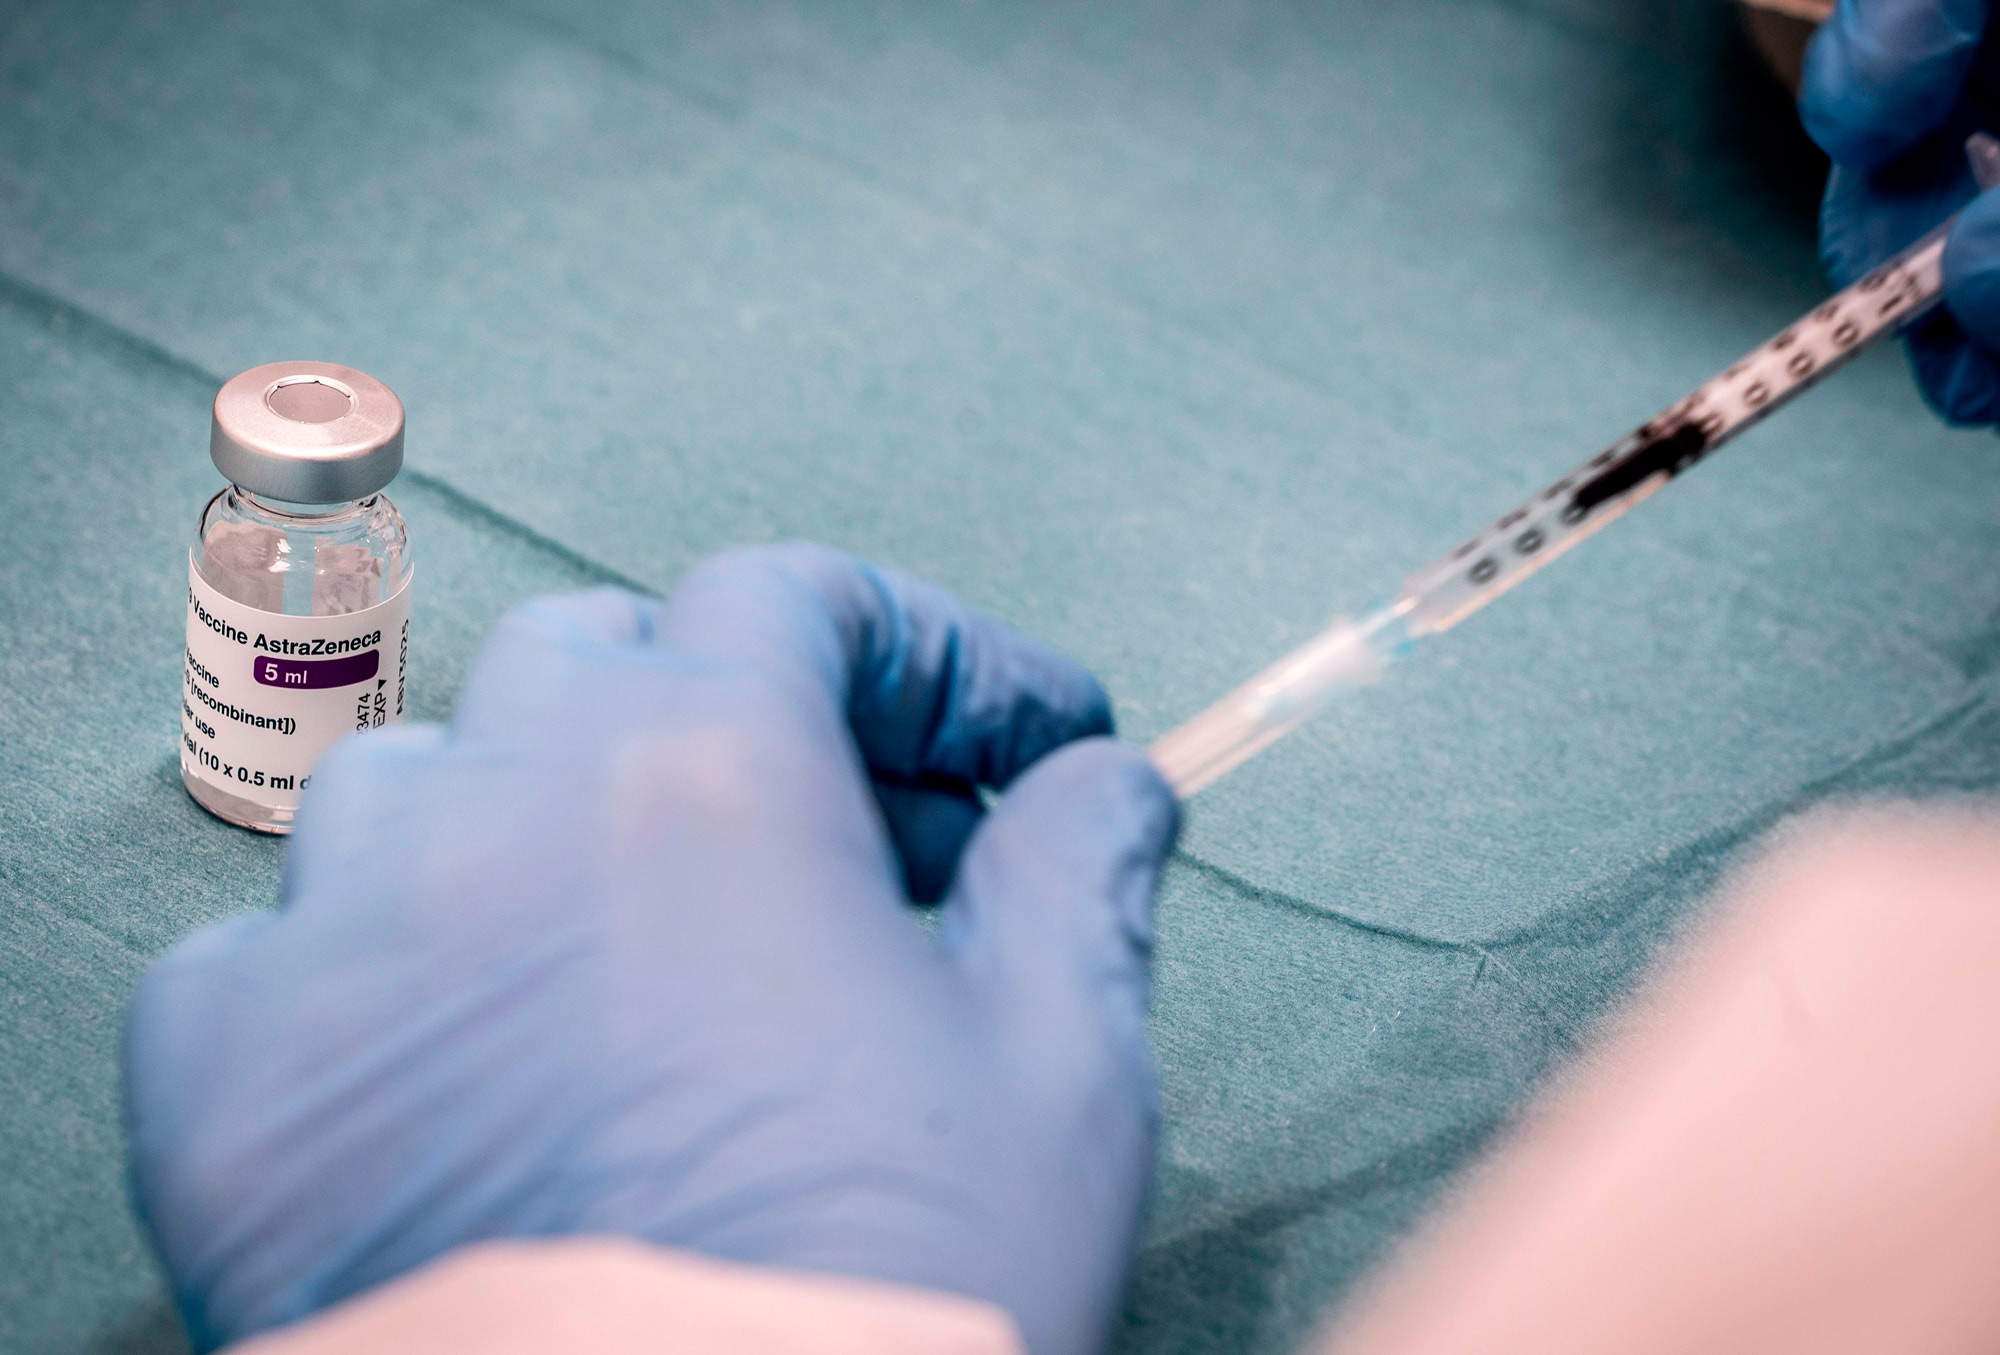 Medical personnel prepares a syringe for vaccination with the AstraZeneca vaccine at the Region Hovedstaden's vaccine center in Copenhagen, Denmark, on February 11.